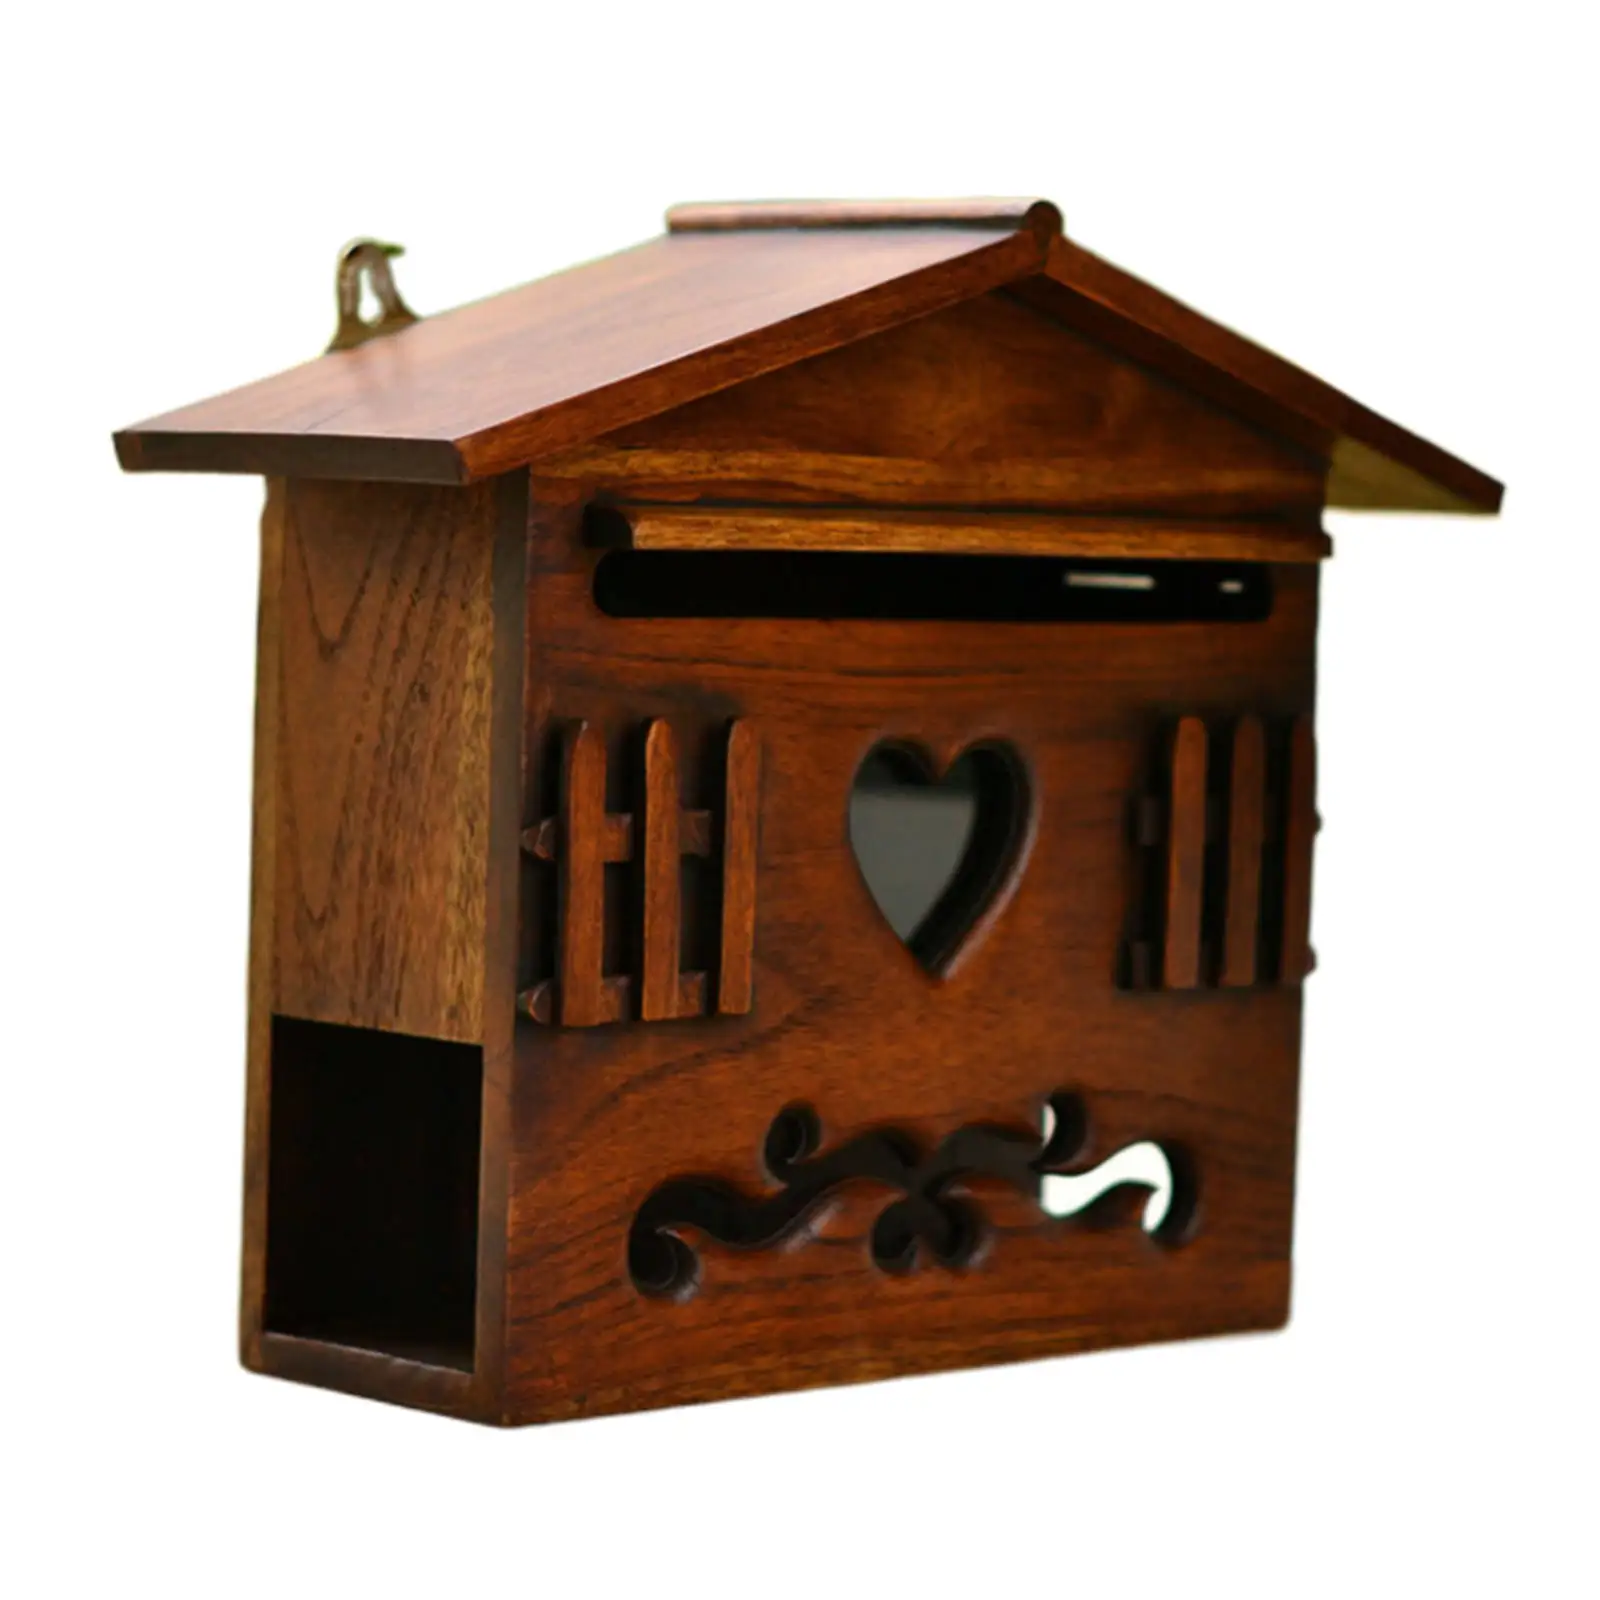 Locking Mailbox Rural Holds Documents Bills Letters Keys Mail Organizer for Home Office Hallway